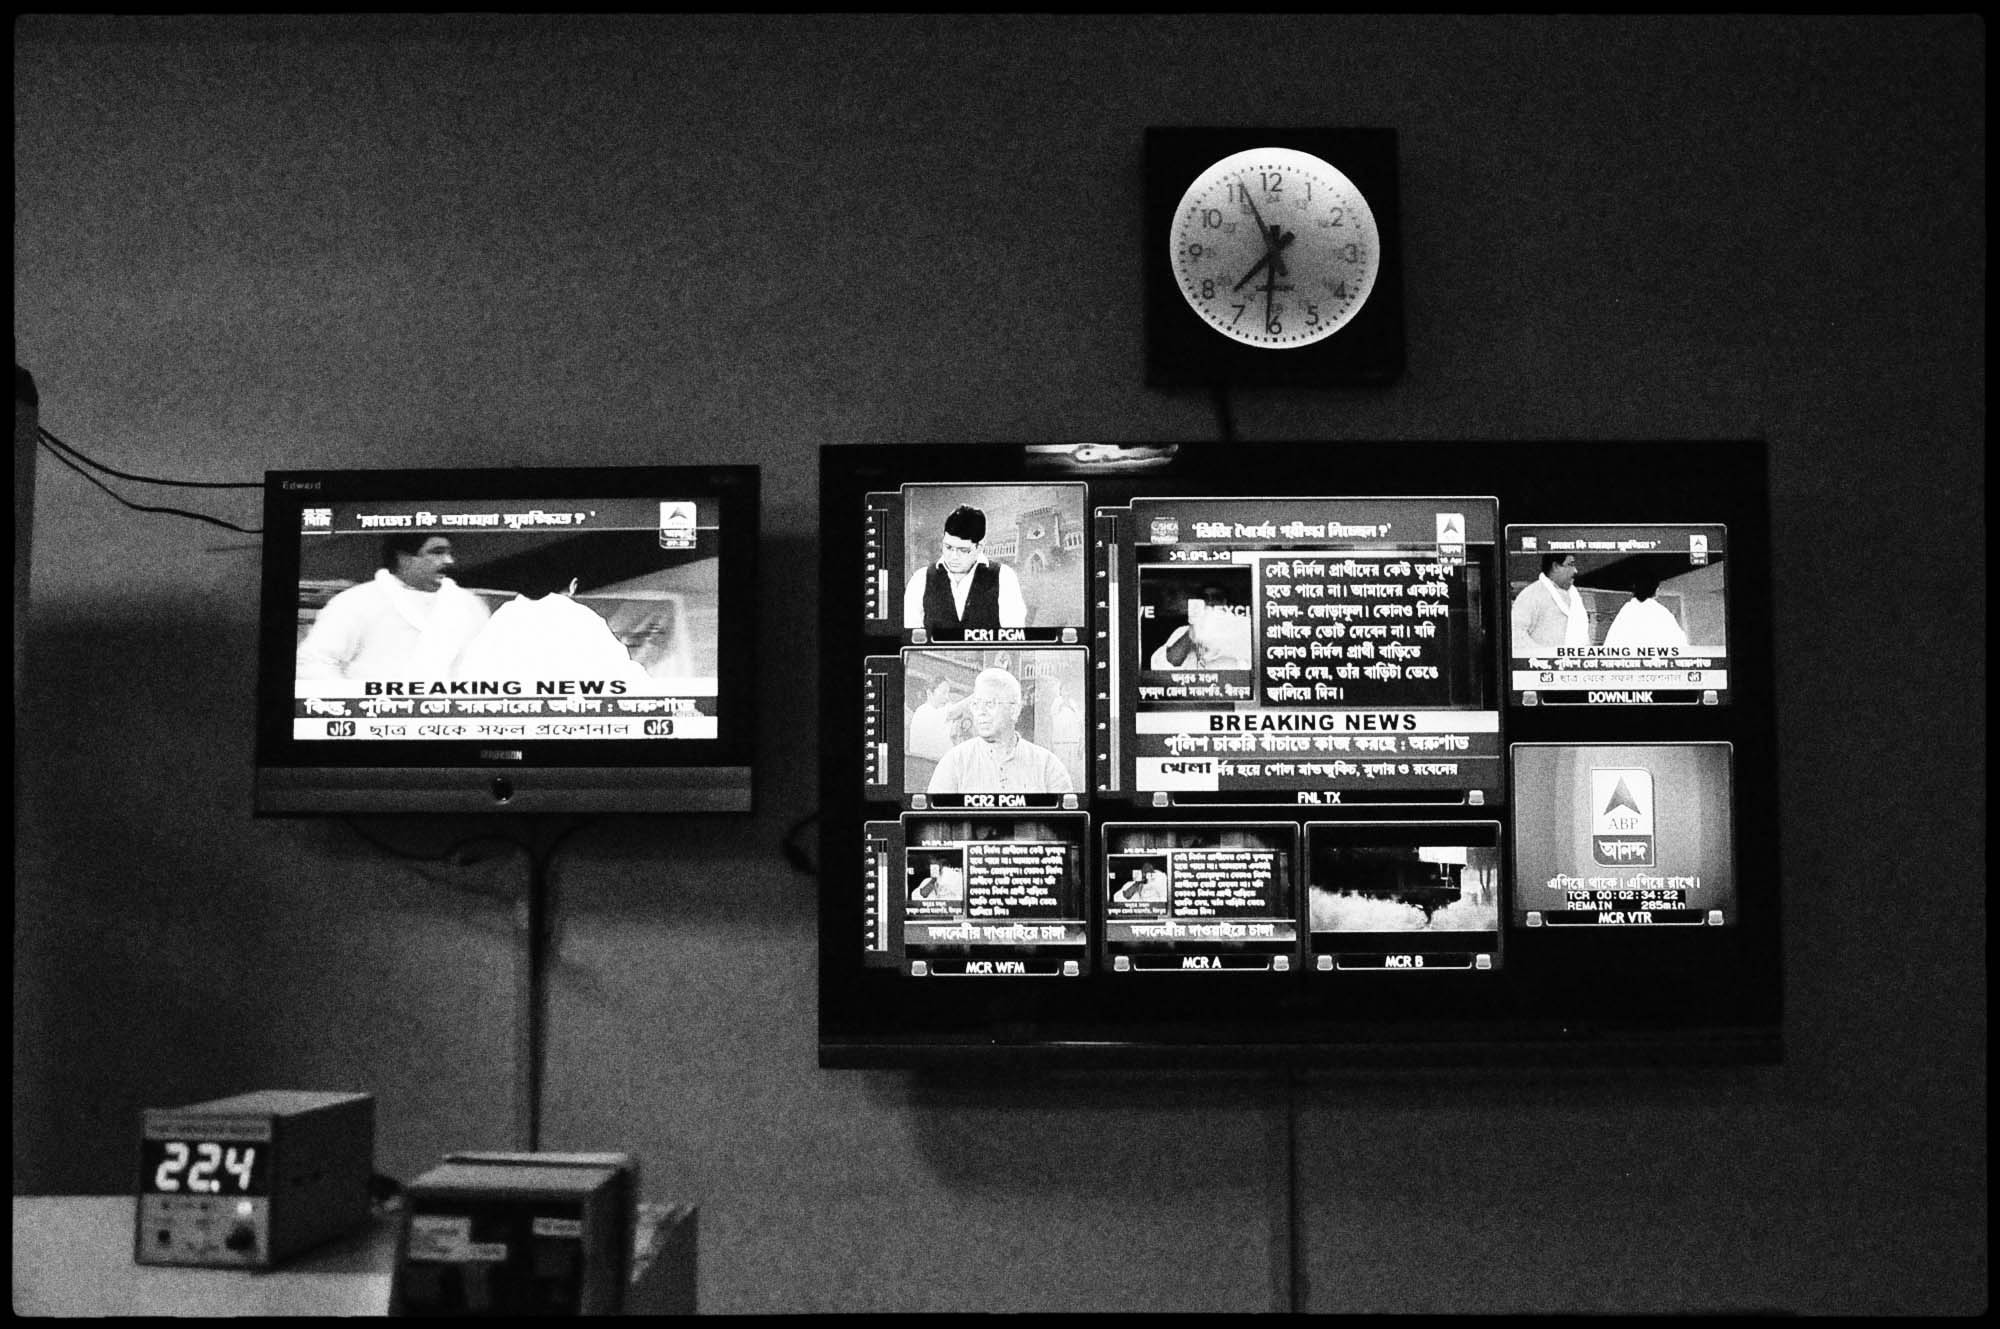 A studio space where the newsroom debates take place in a popular news channel in Kolkata